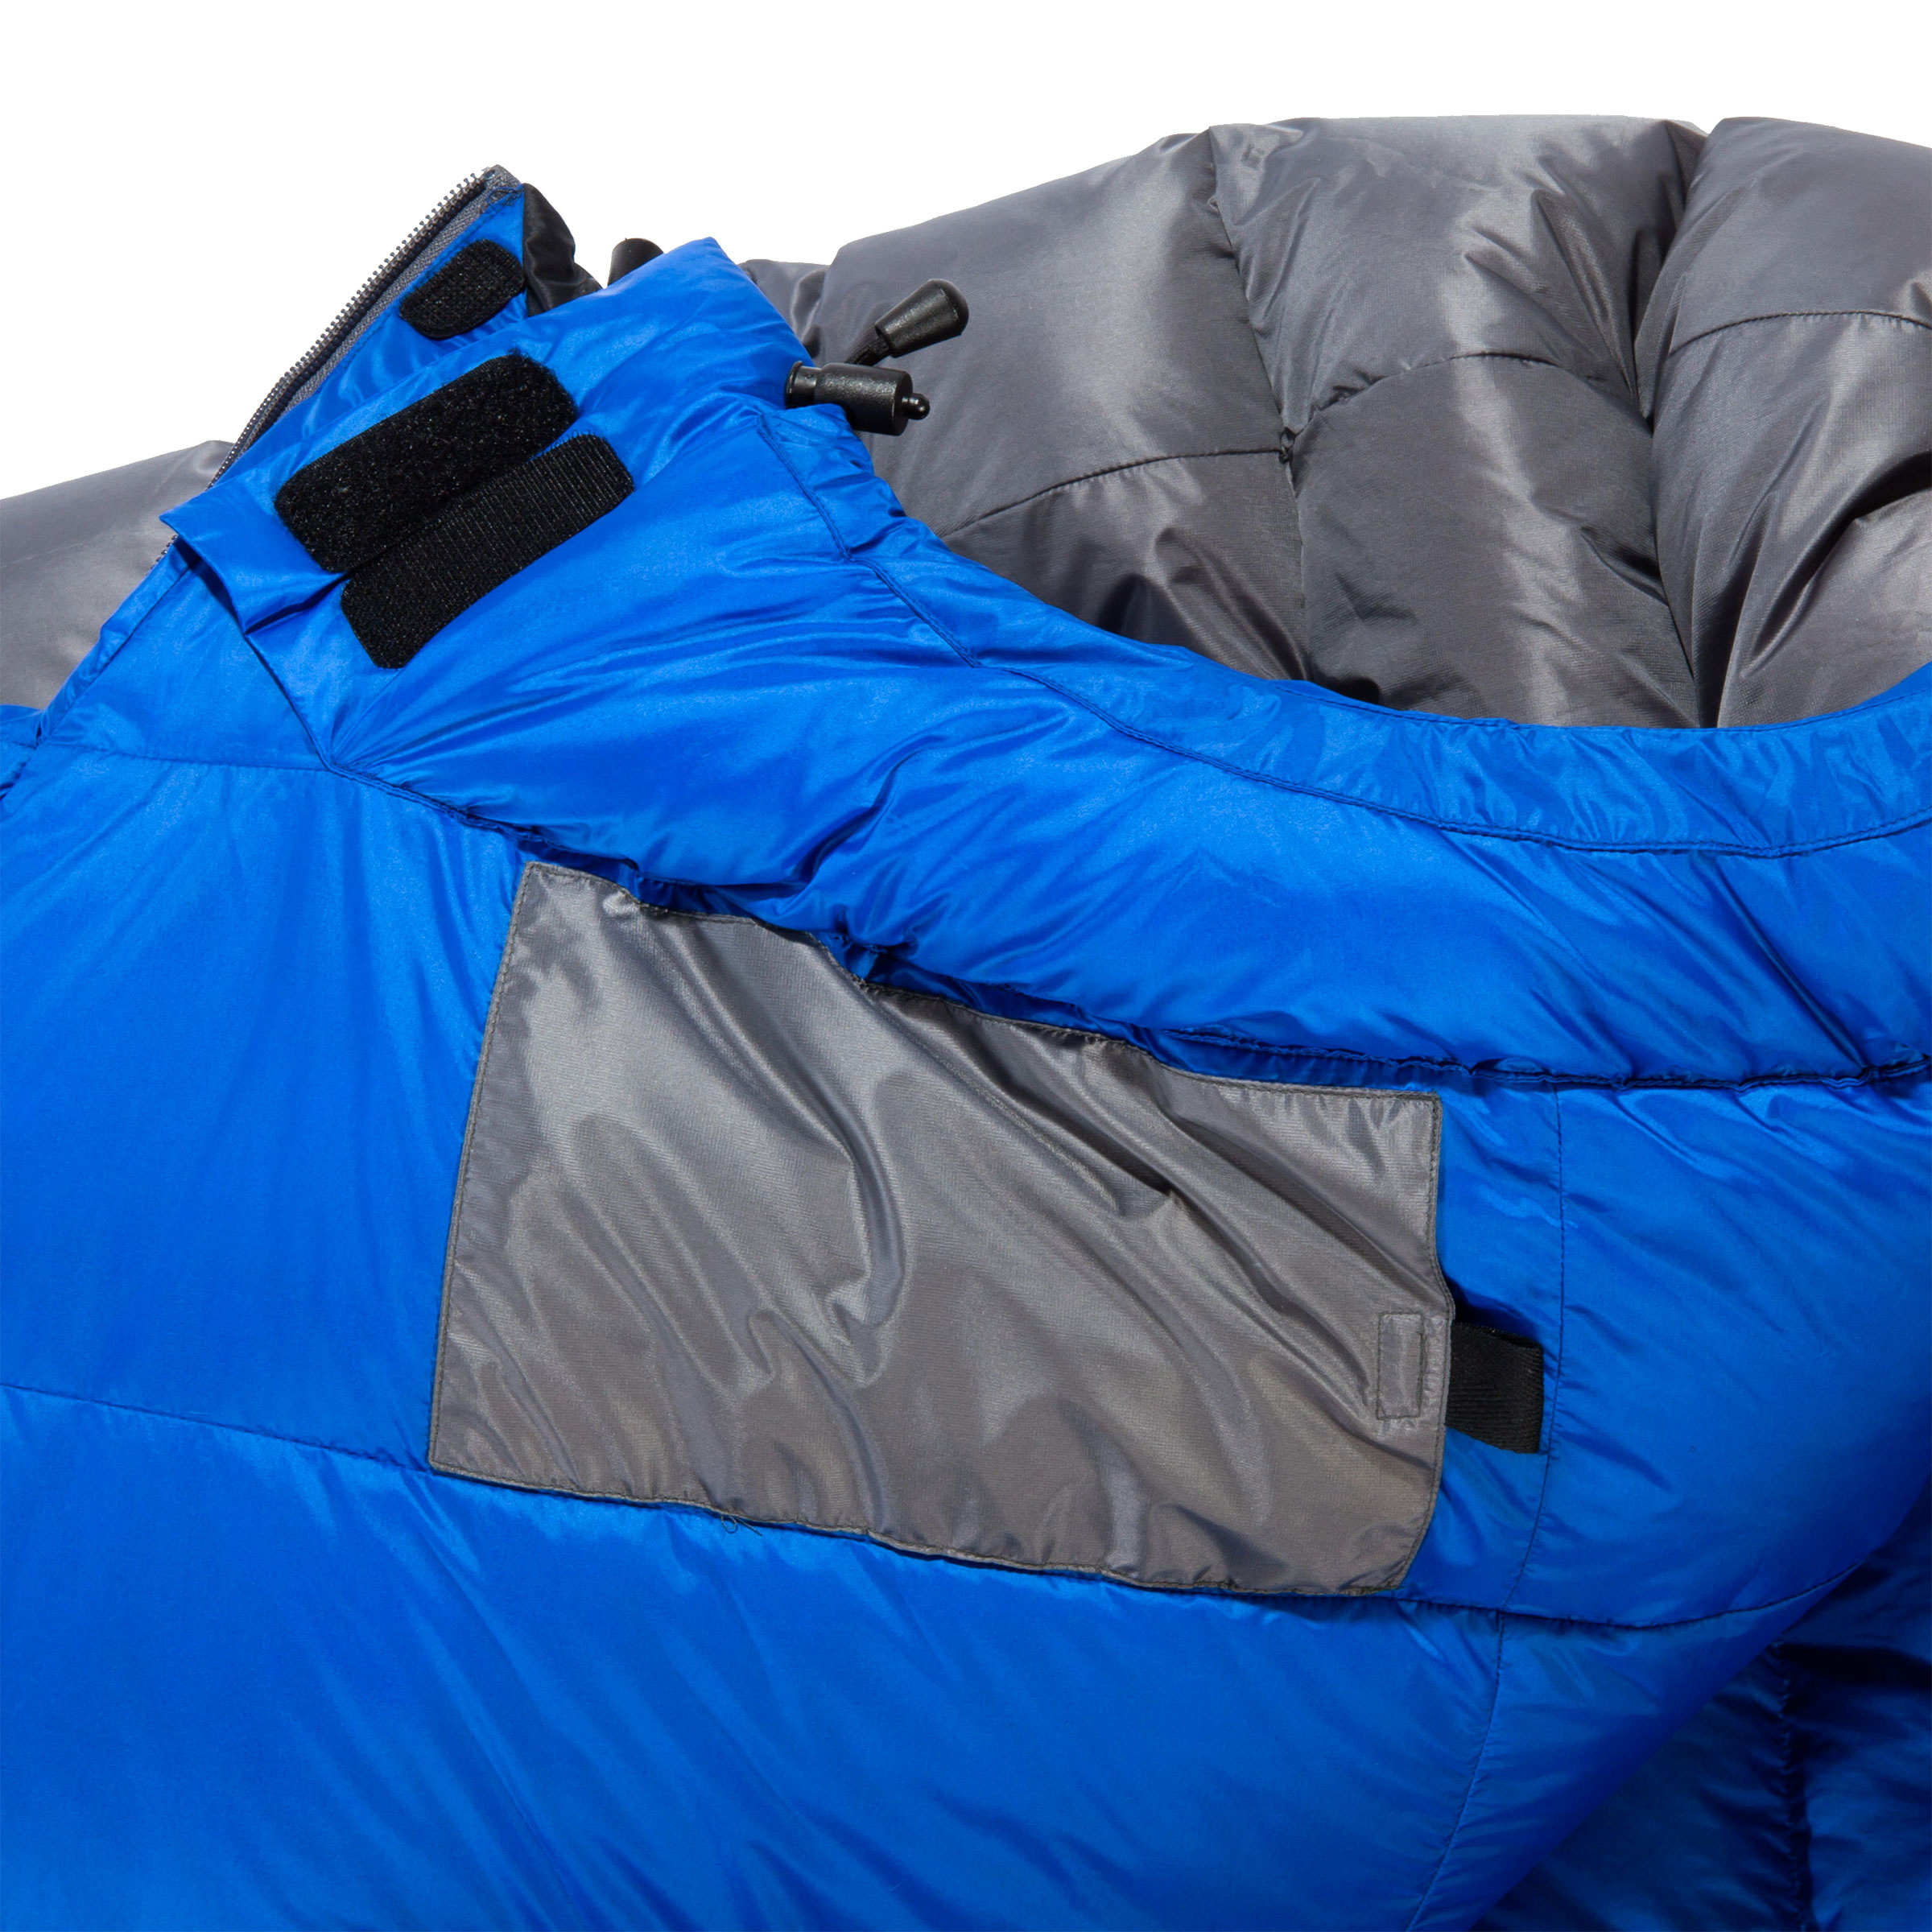 Are Extremely EXPENSIVE Sleeping Bags Worth The Price?! - YouTube